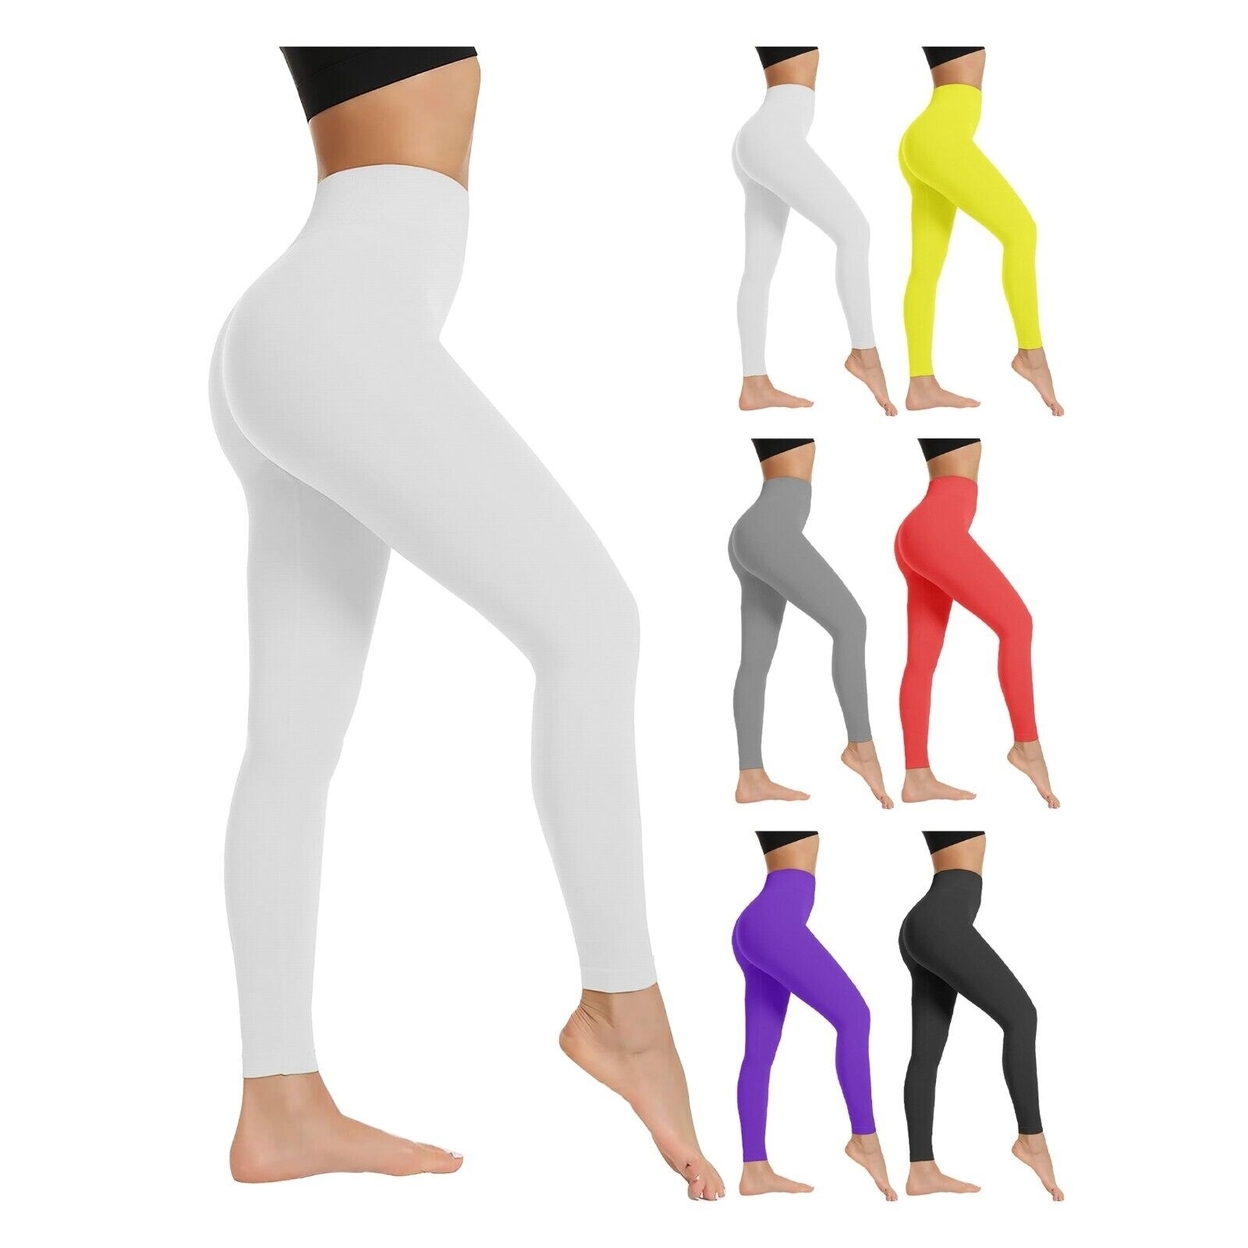 2-Pack: Women's High Waist Super Soft Active Athlete Stretch Yoga Cozy Leggings - Yellow & Red, X-large